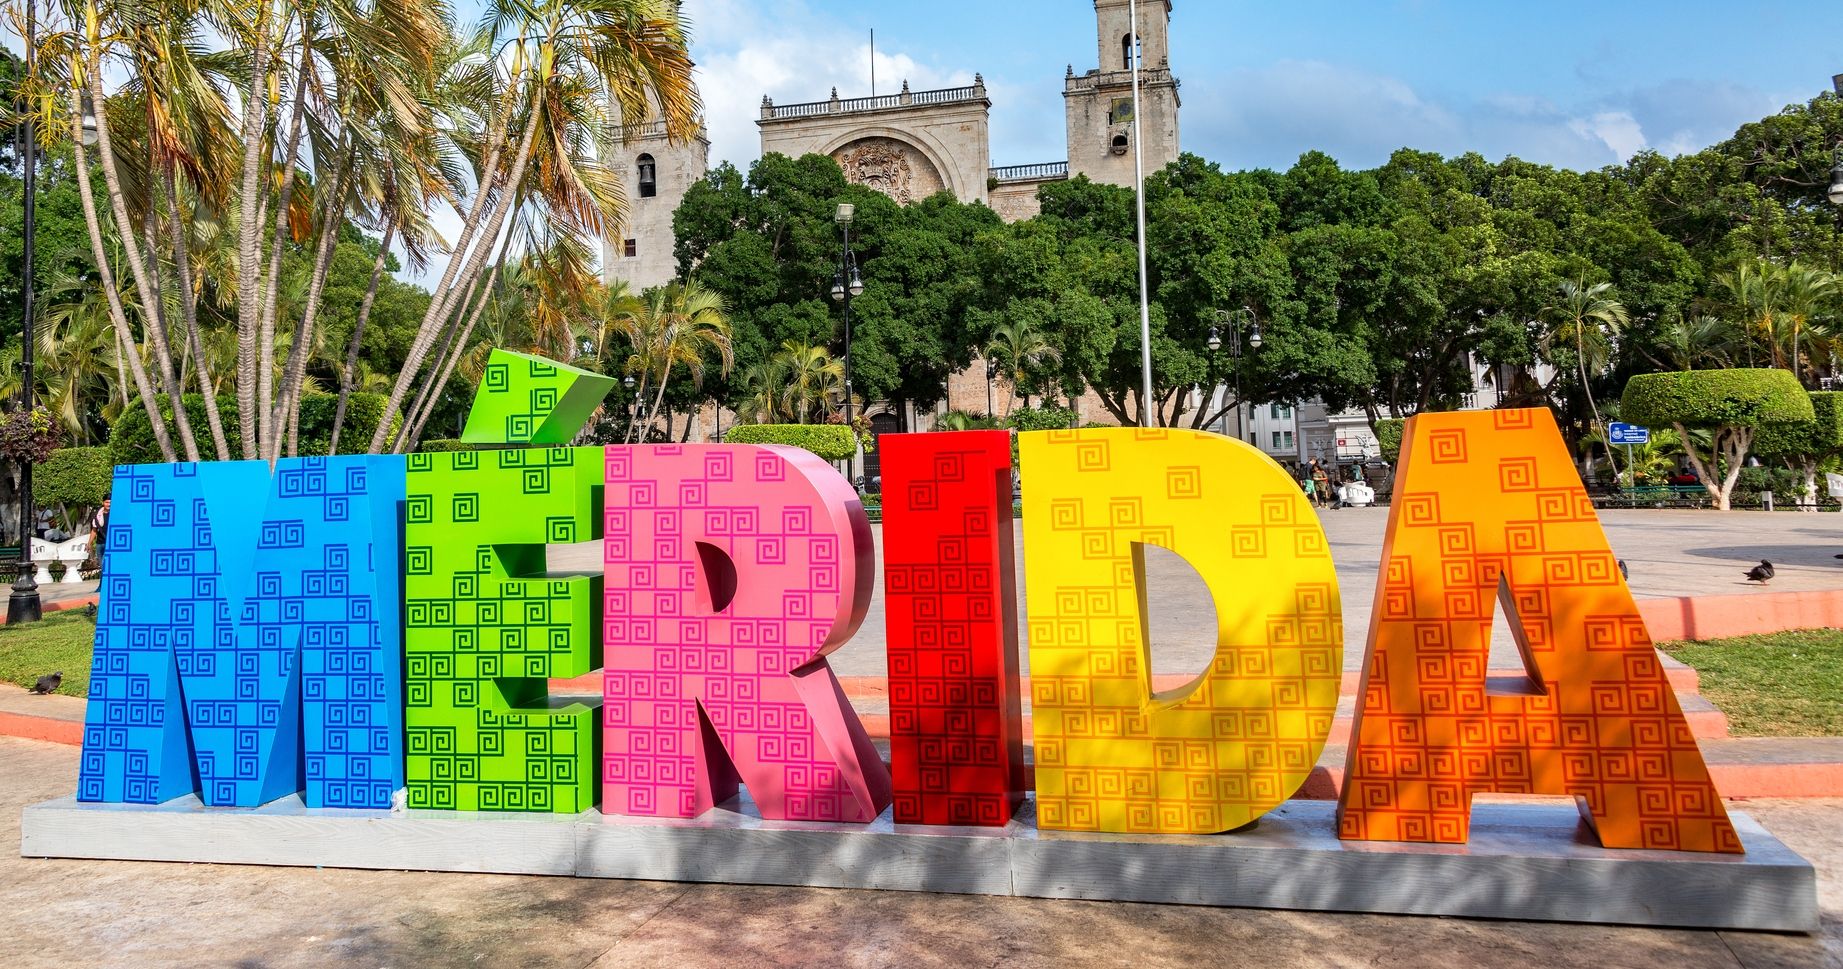 10 Things To Do In Mérida: Complete Guide To This Beautiful Yucatán Capital